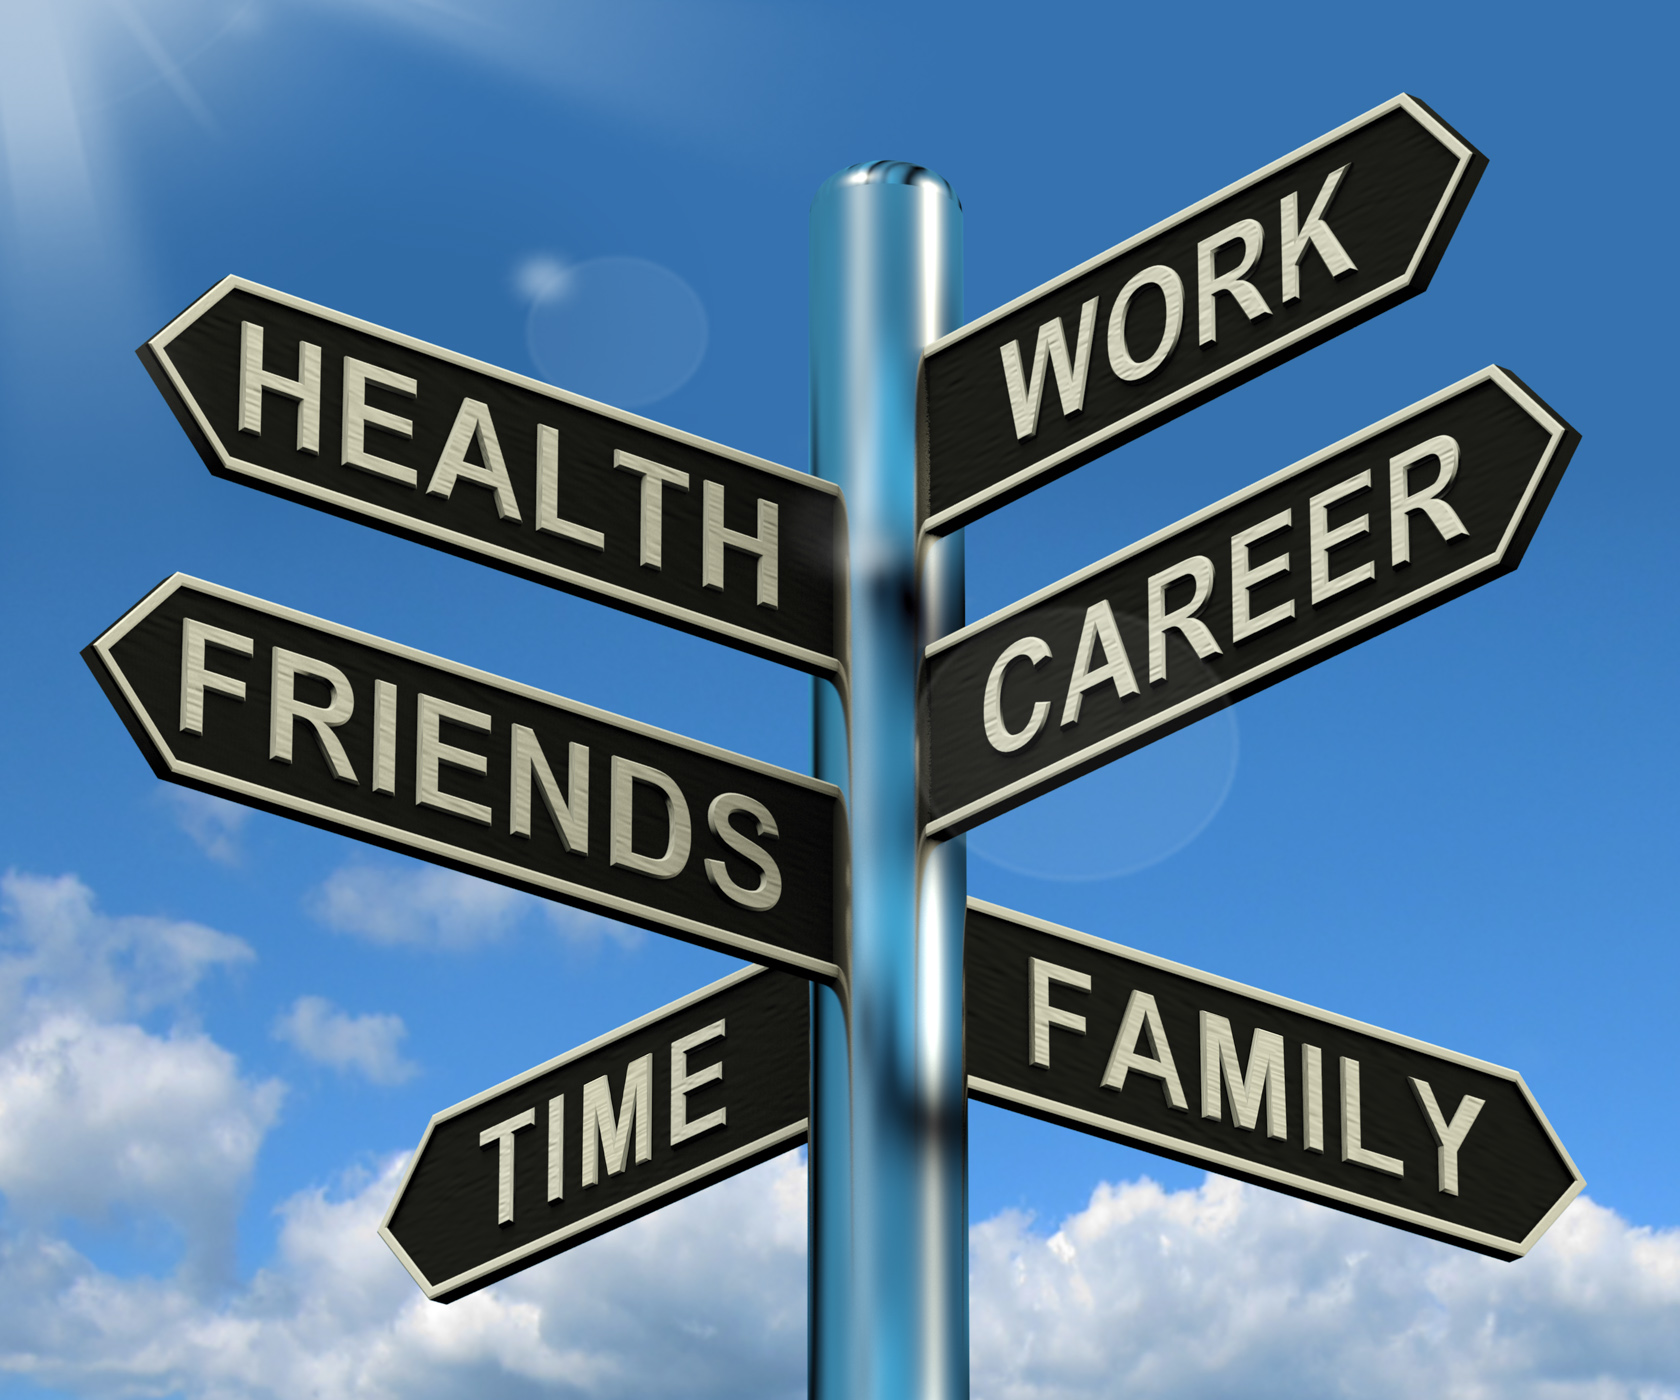 Health Work Career Friends Signpost Showing Life And Lifestyle Balance, Ambition, Life, Signpost, Roadsign, HQ Photo